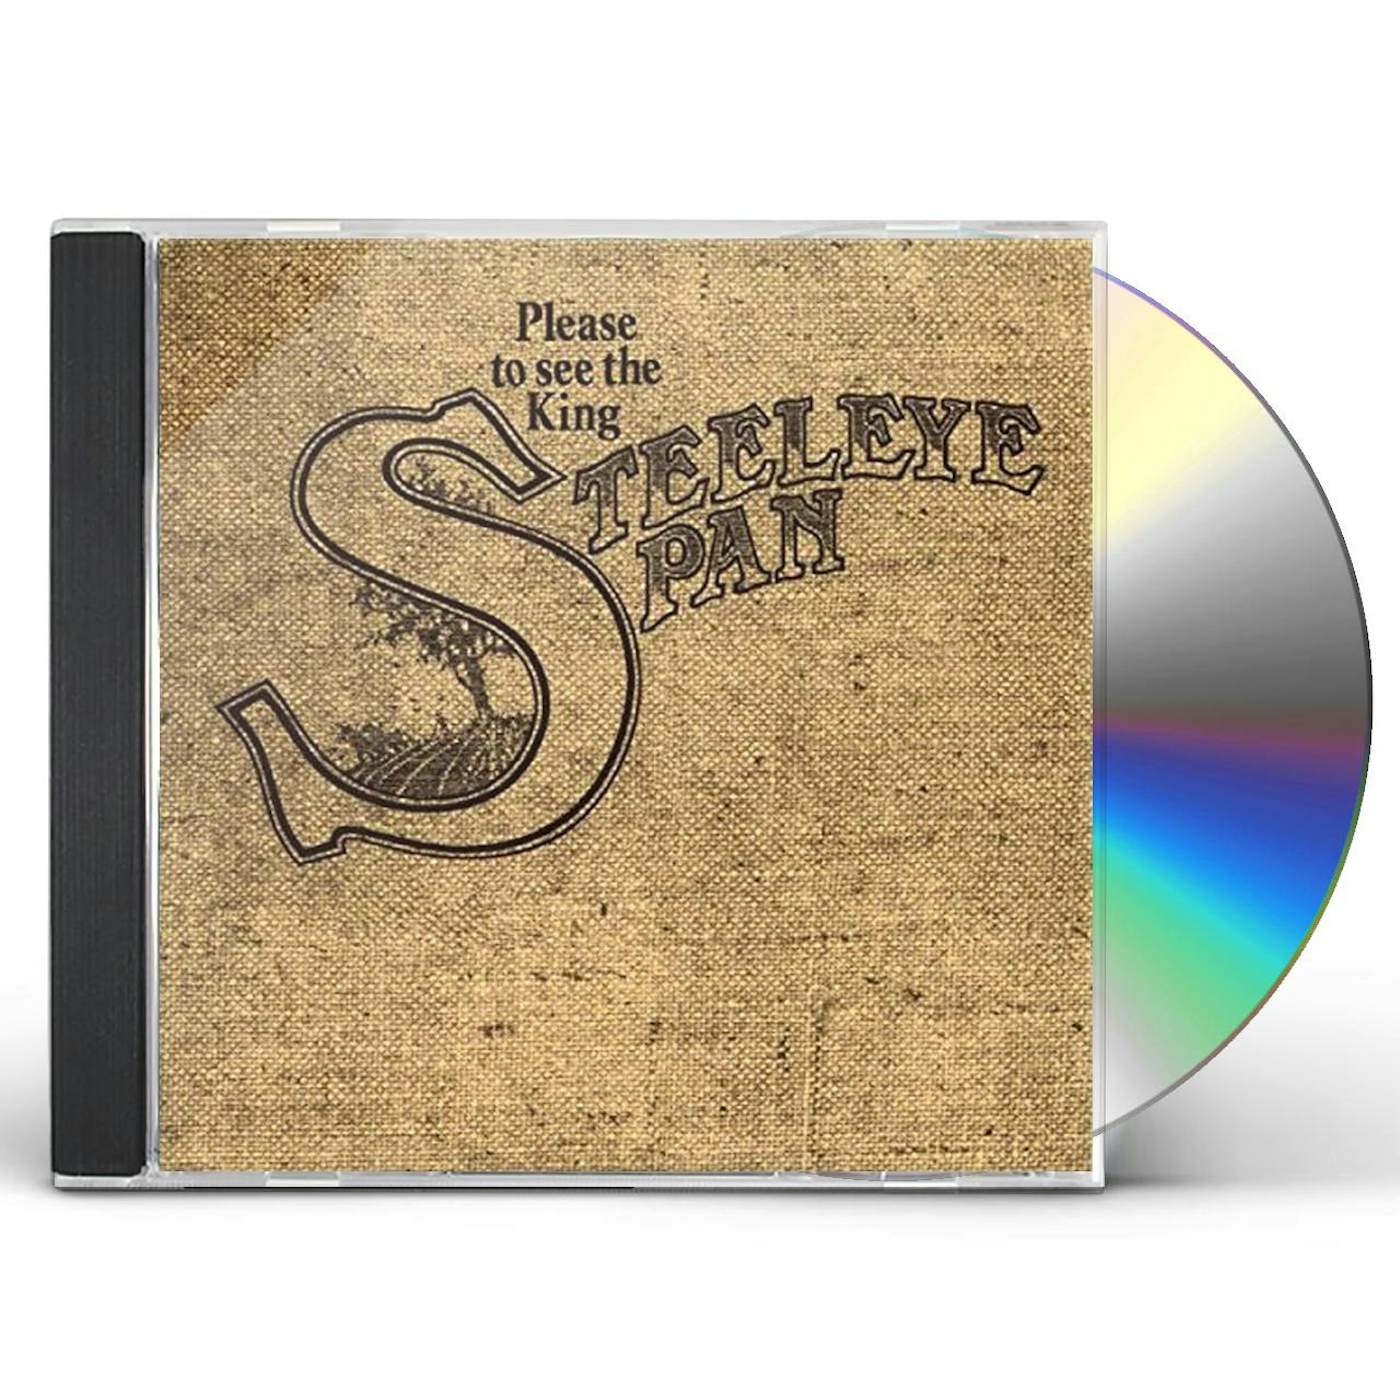 Steeleye Span PLEASE TO SEE THE KING CD